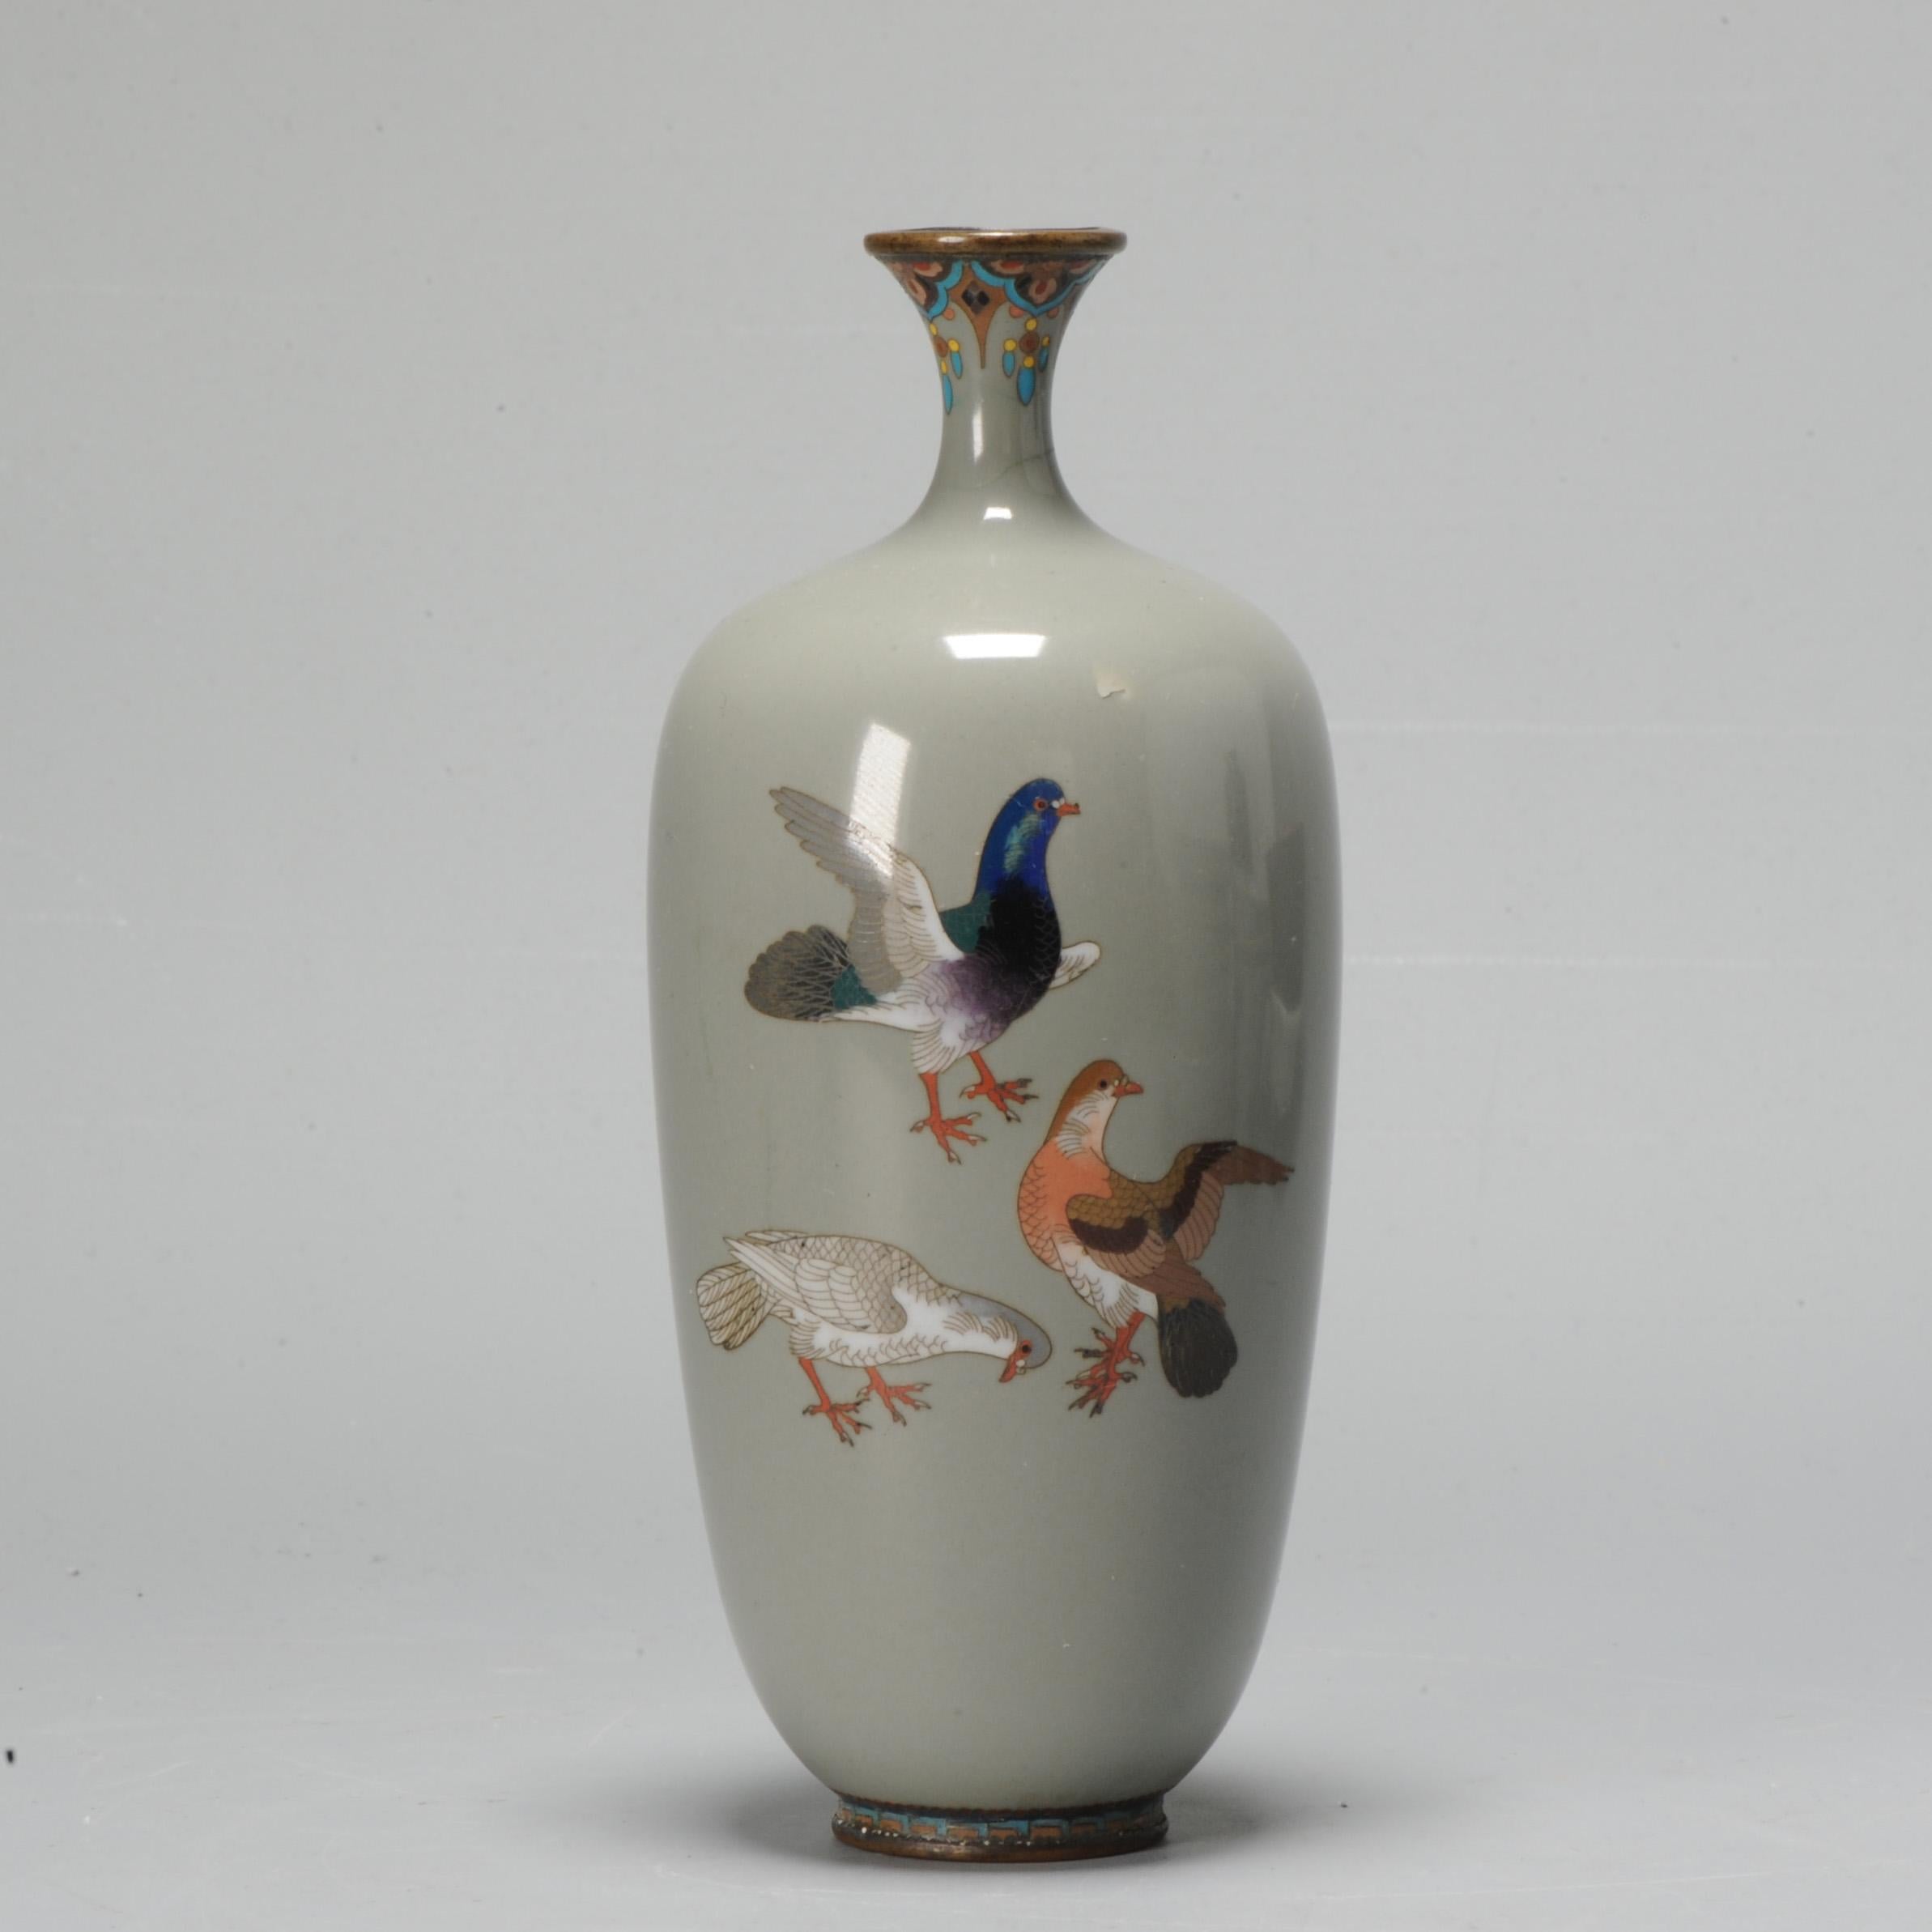 Top quality small vase from the Meiji period. With a nice scene of birds (Doves/Pigeons)

Meiji era (1868-1912), 19th century

Interesting article about Japanese Cloisonne can be found here.


Condition
Some usage signs/ware (all damages